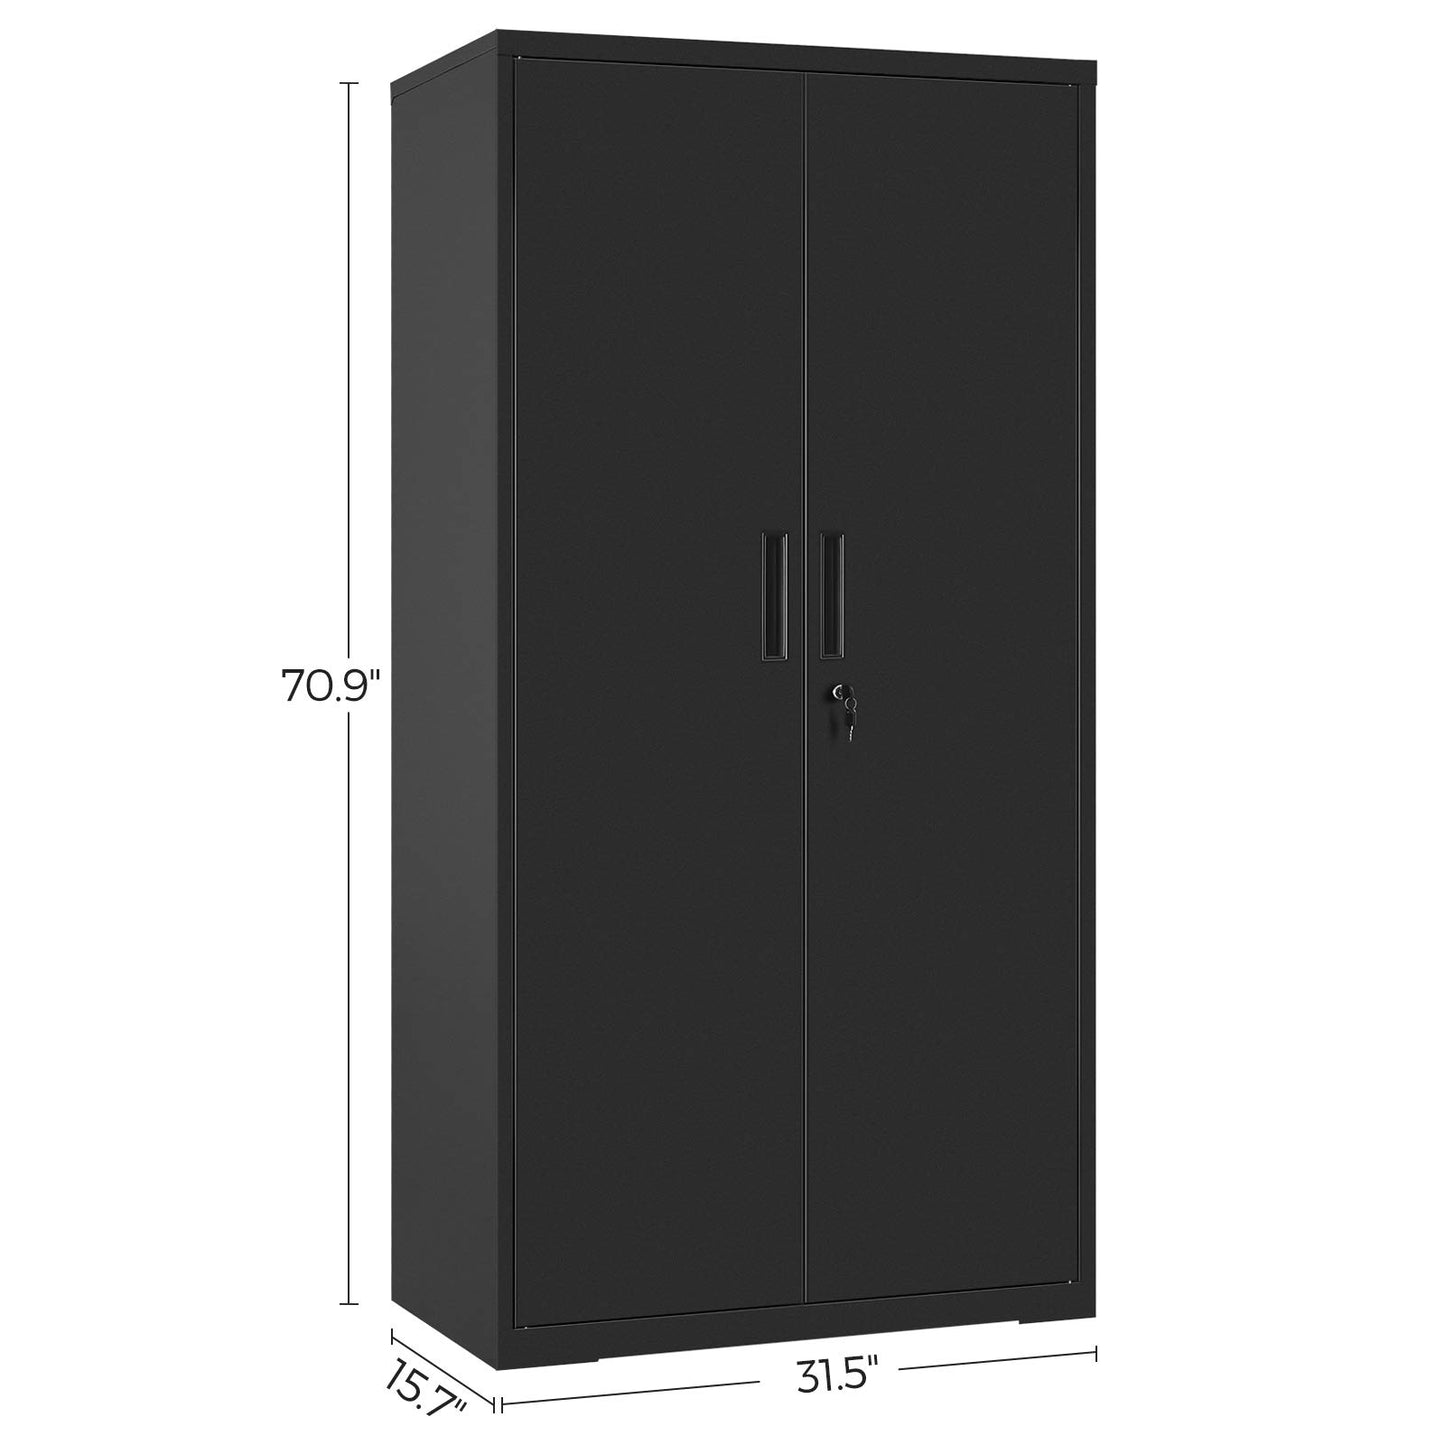 SONGMICS Garage Cabinet, Metal Storage Cabinet with Doors and Shelves, Office Cabinet for Home Office, Garage and Utility Room, Black UOMC015B01